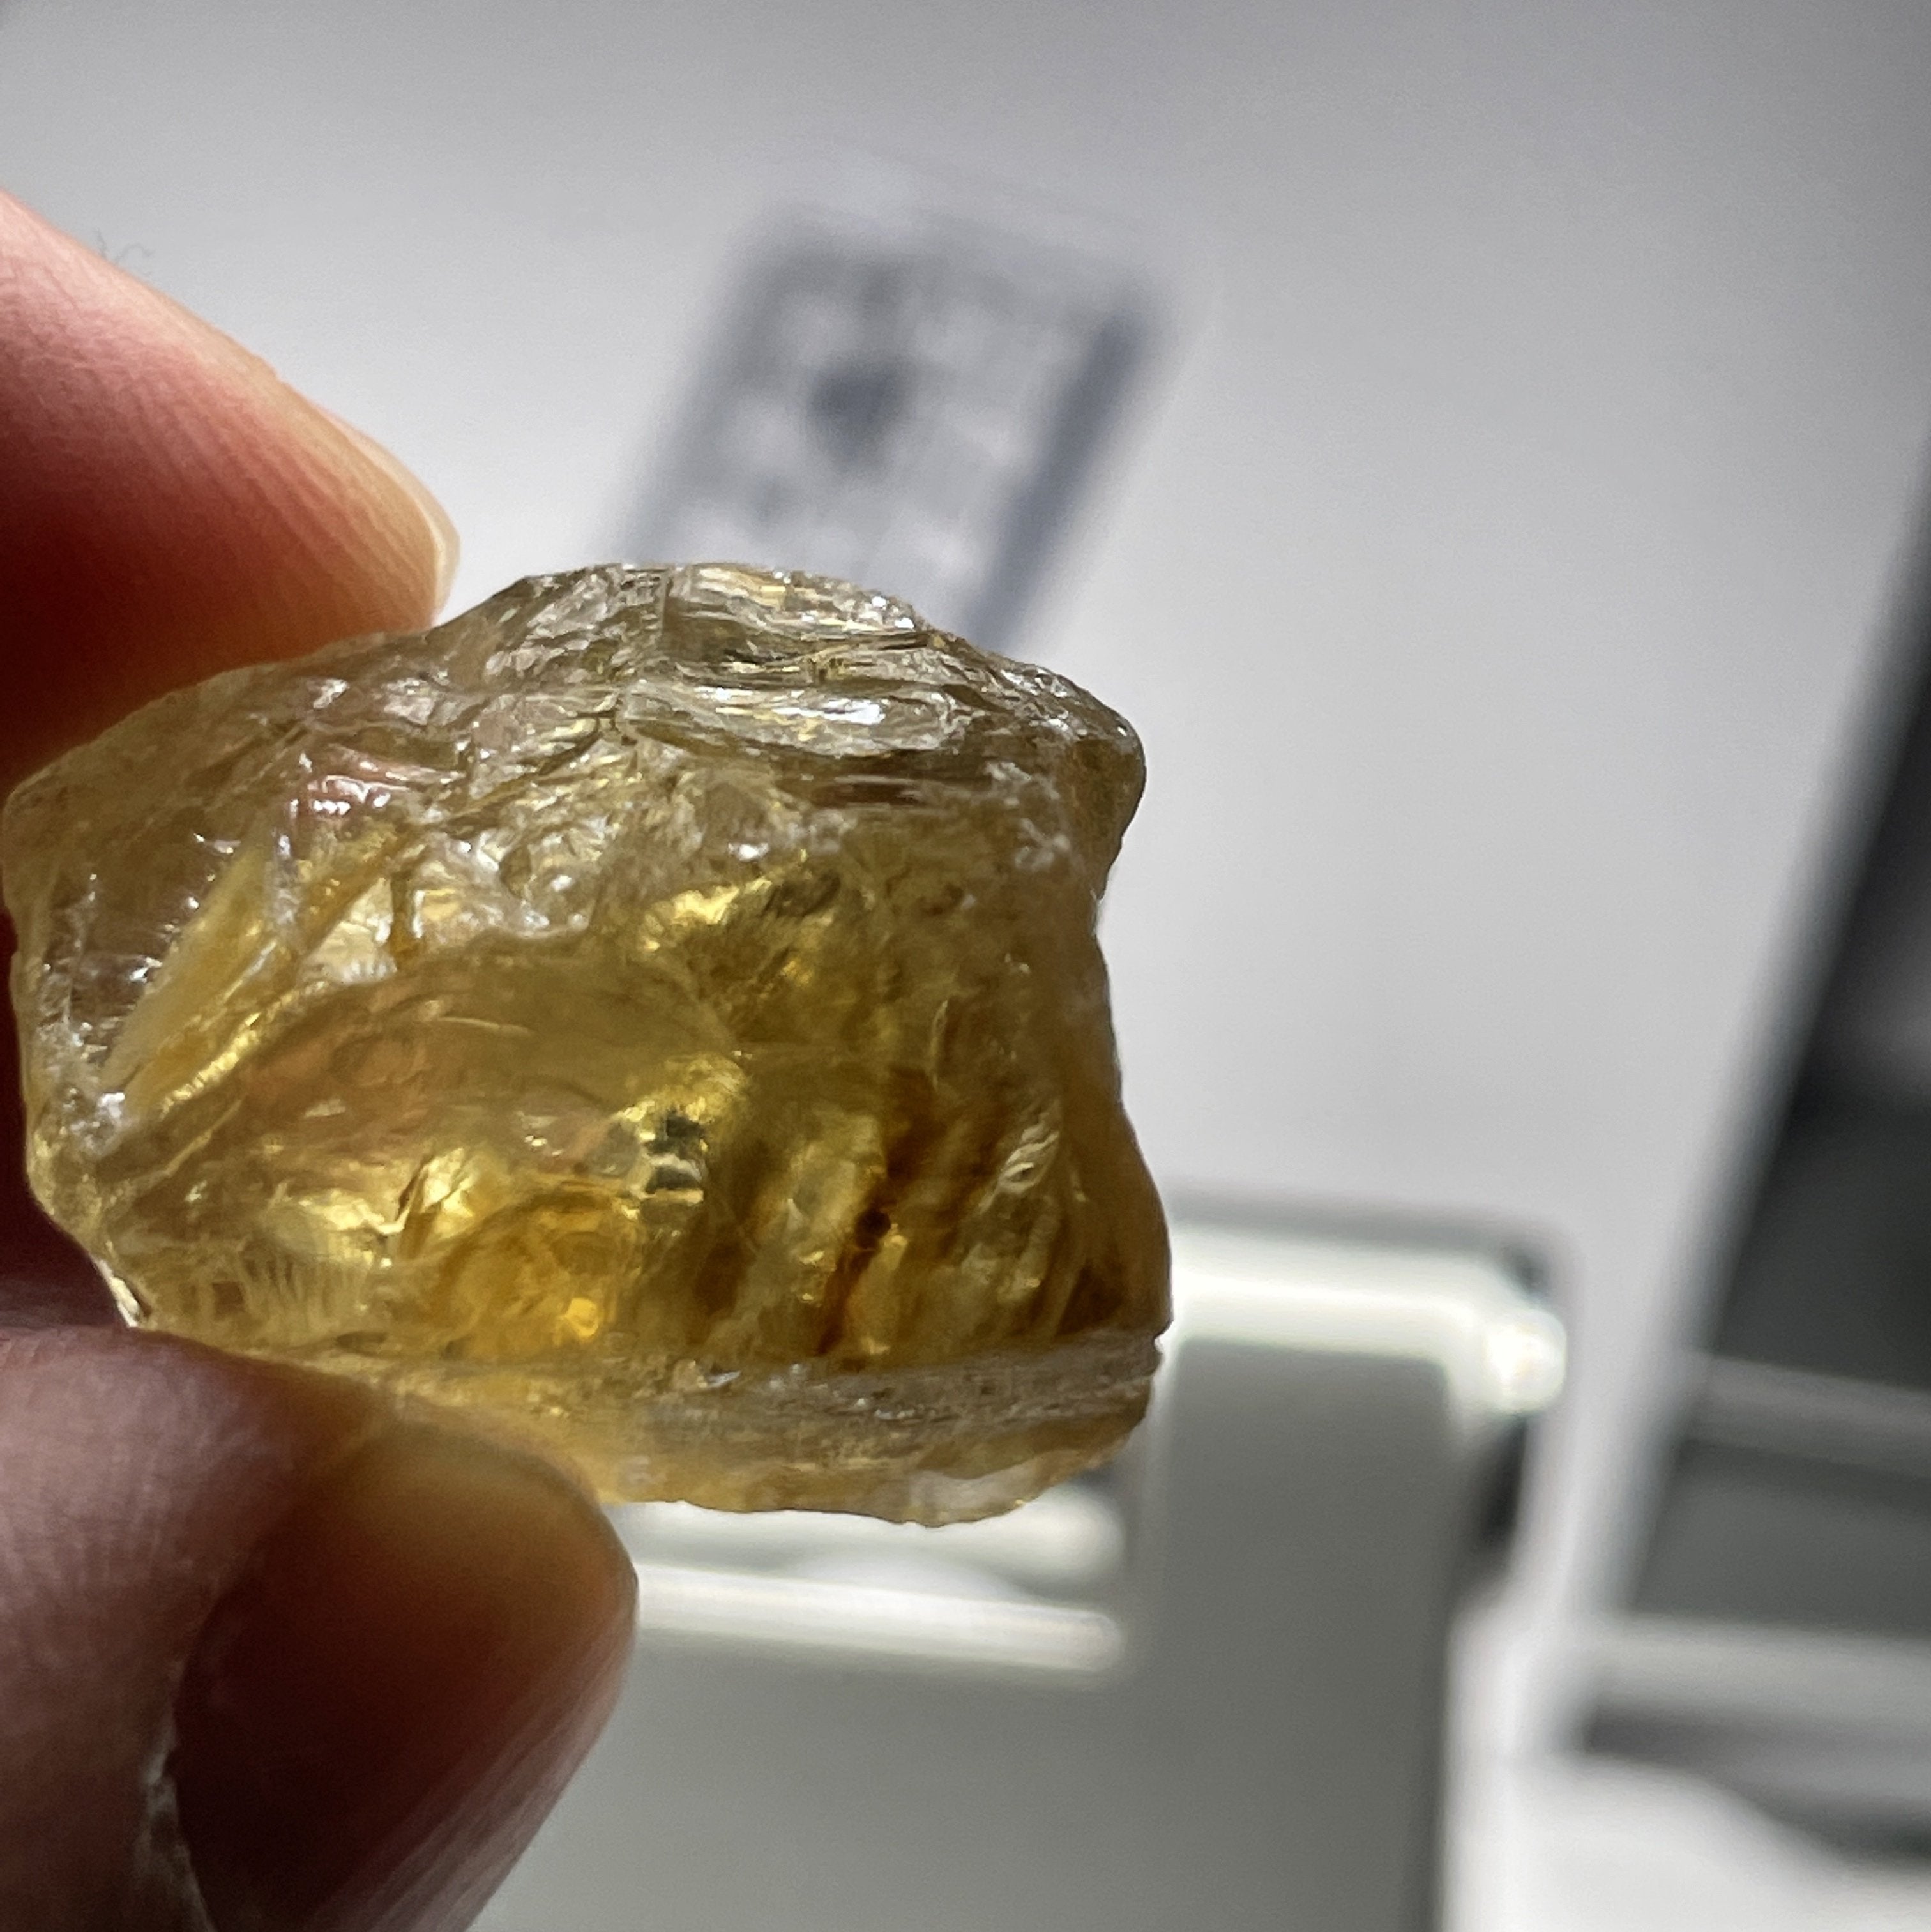 14.89Gm Citrine Zambia. Untreated Unheated. Rare As Not Heated From Amethyst Natural Colour.